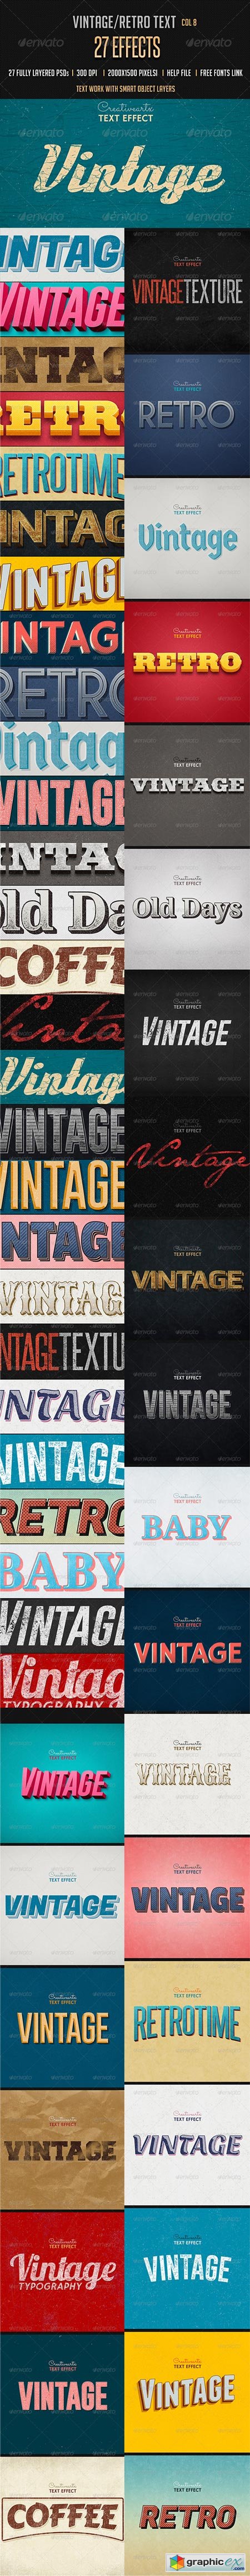 Vintage Retro Text Effects Col 8 8537330